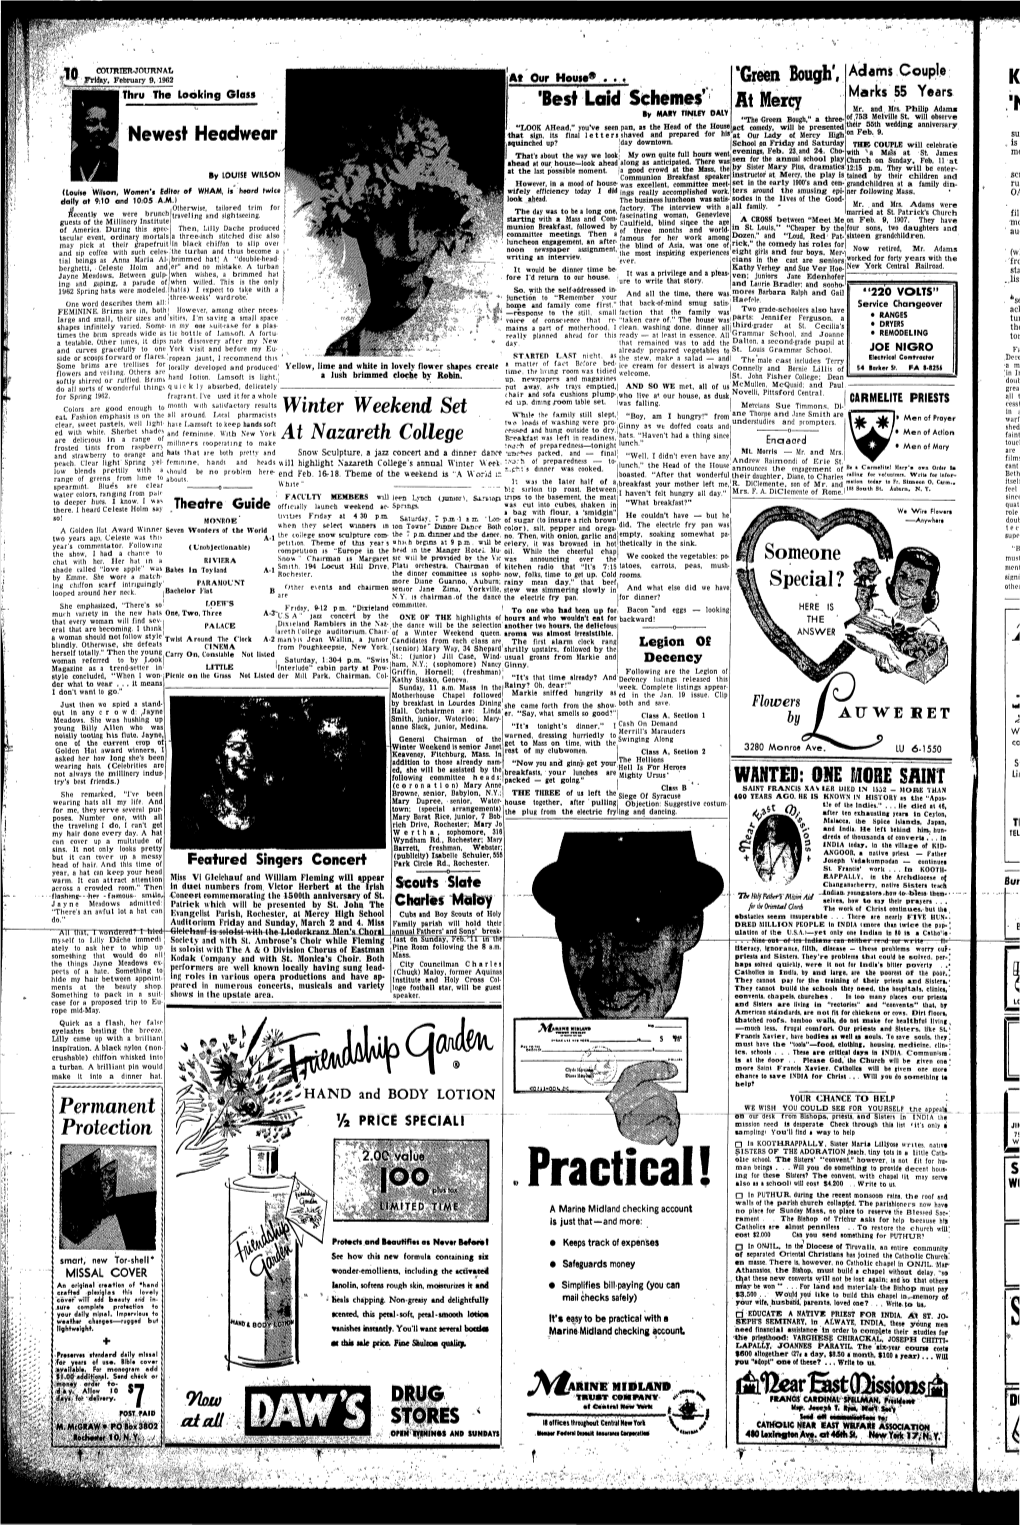 Catholic-Courier-Journal-1962